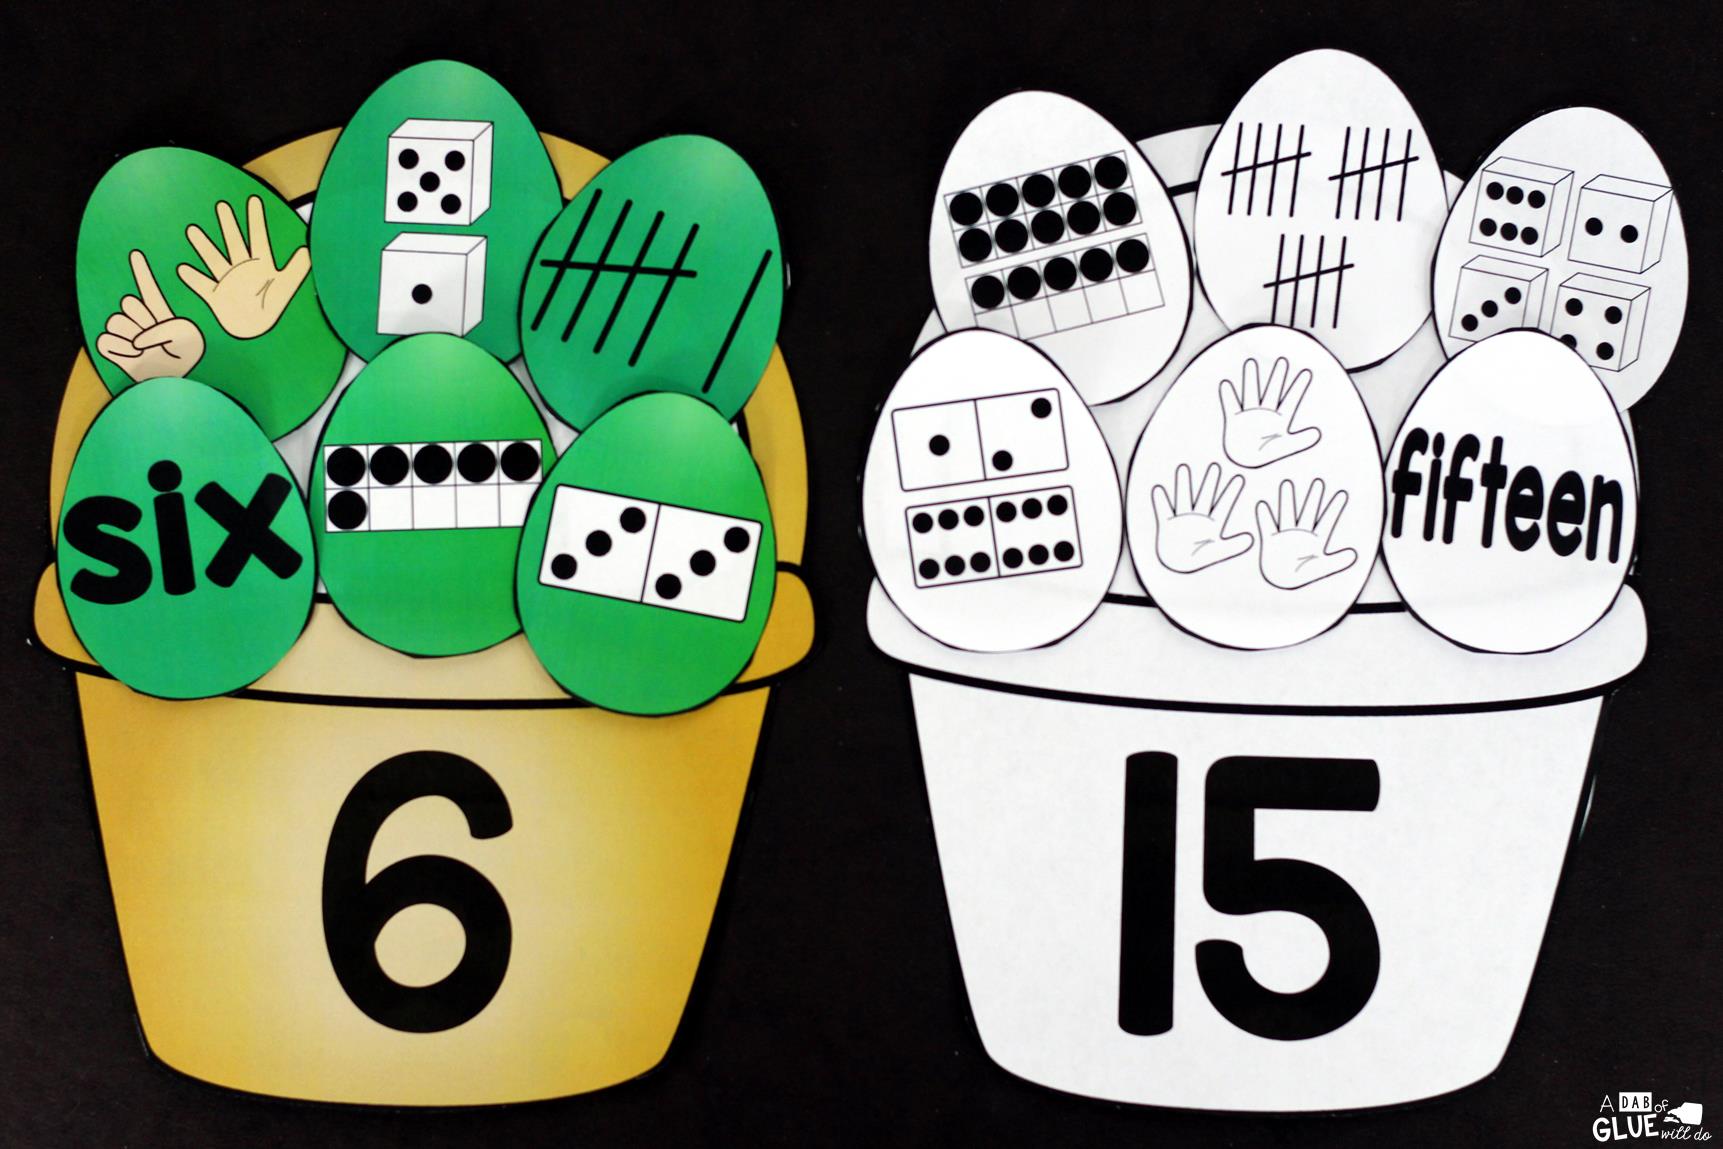 Make learning fun with these themed Initial Sound and Number Match-Ups. Your elementary age students will love this fun Easter themed literacy center and math center! Perfect for literacy stations, math stations, or small review groups. Use in your Preschool, Kindergarten, and First Grade classrooms. Black and white options available to save your color ink.